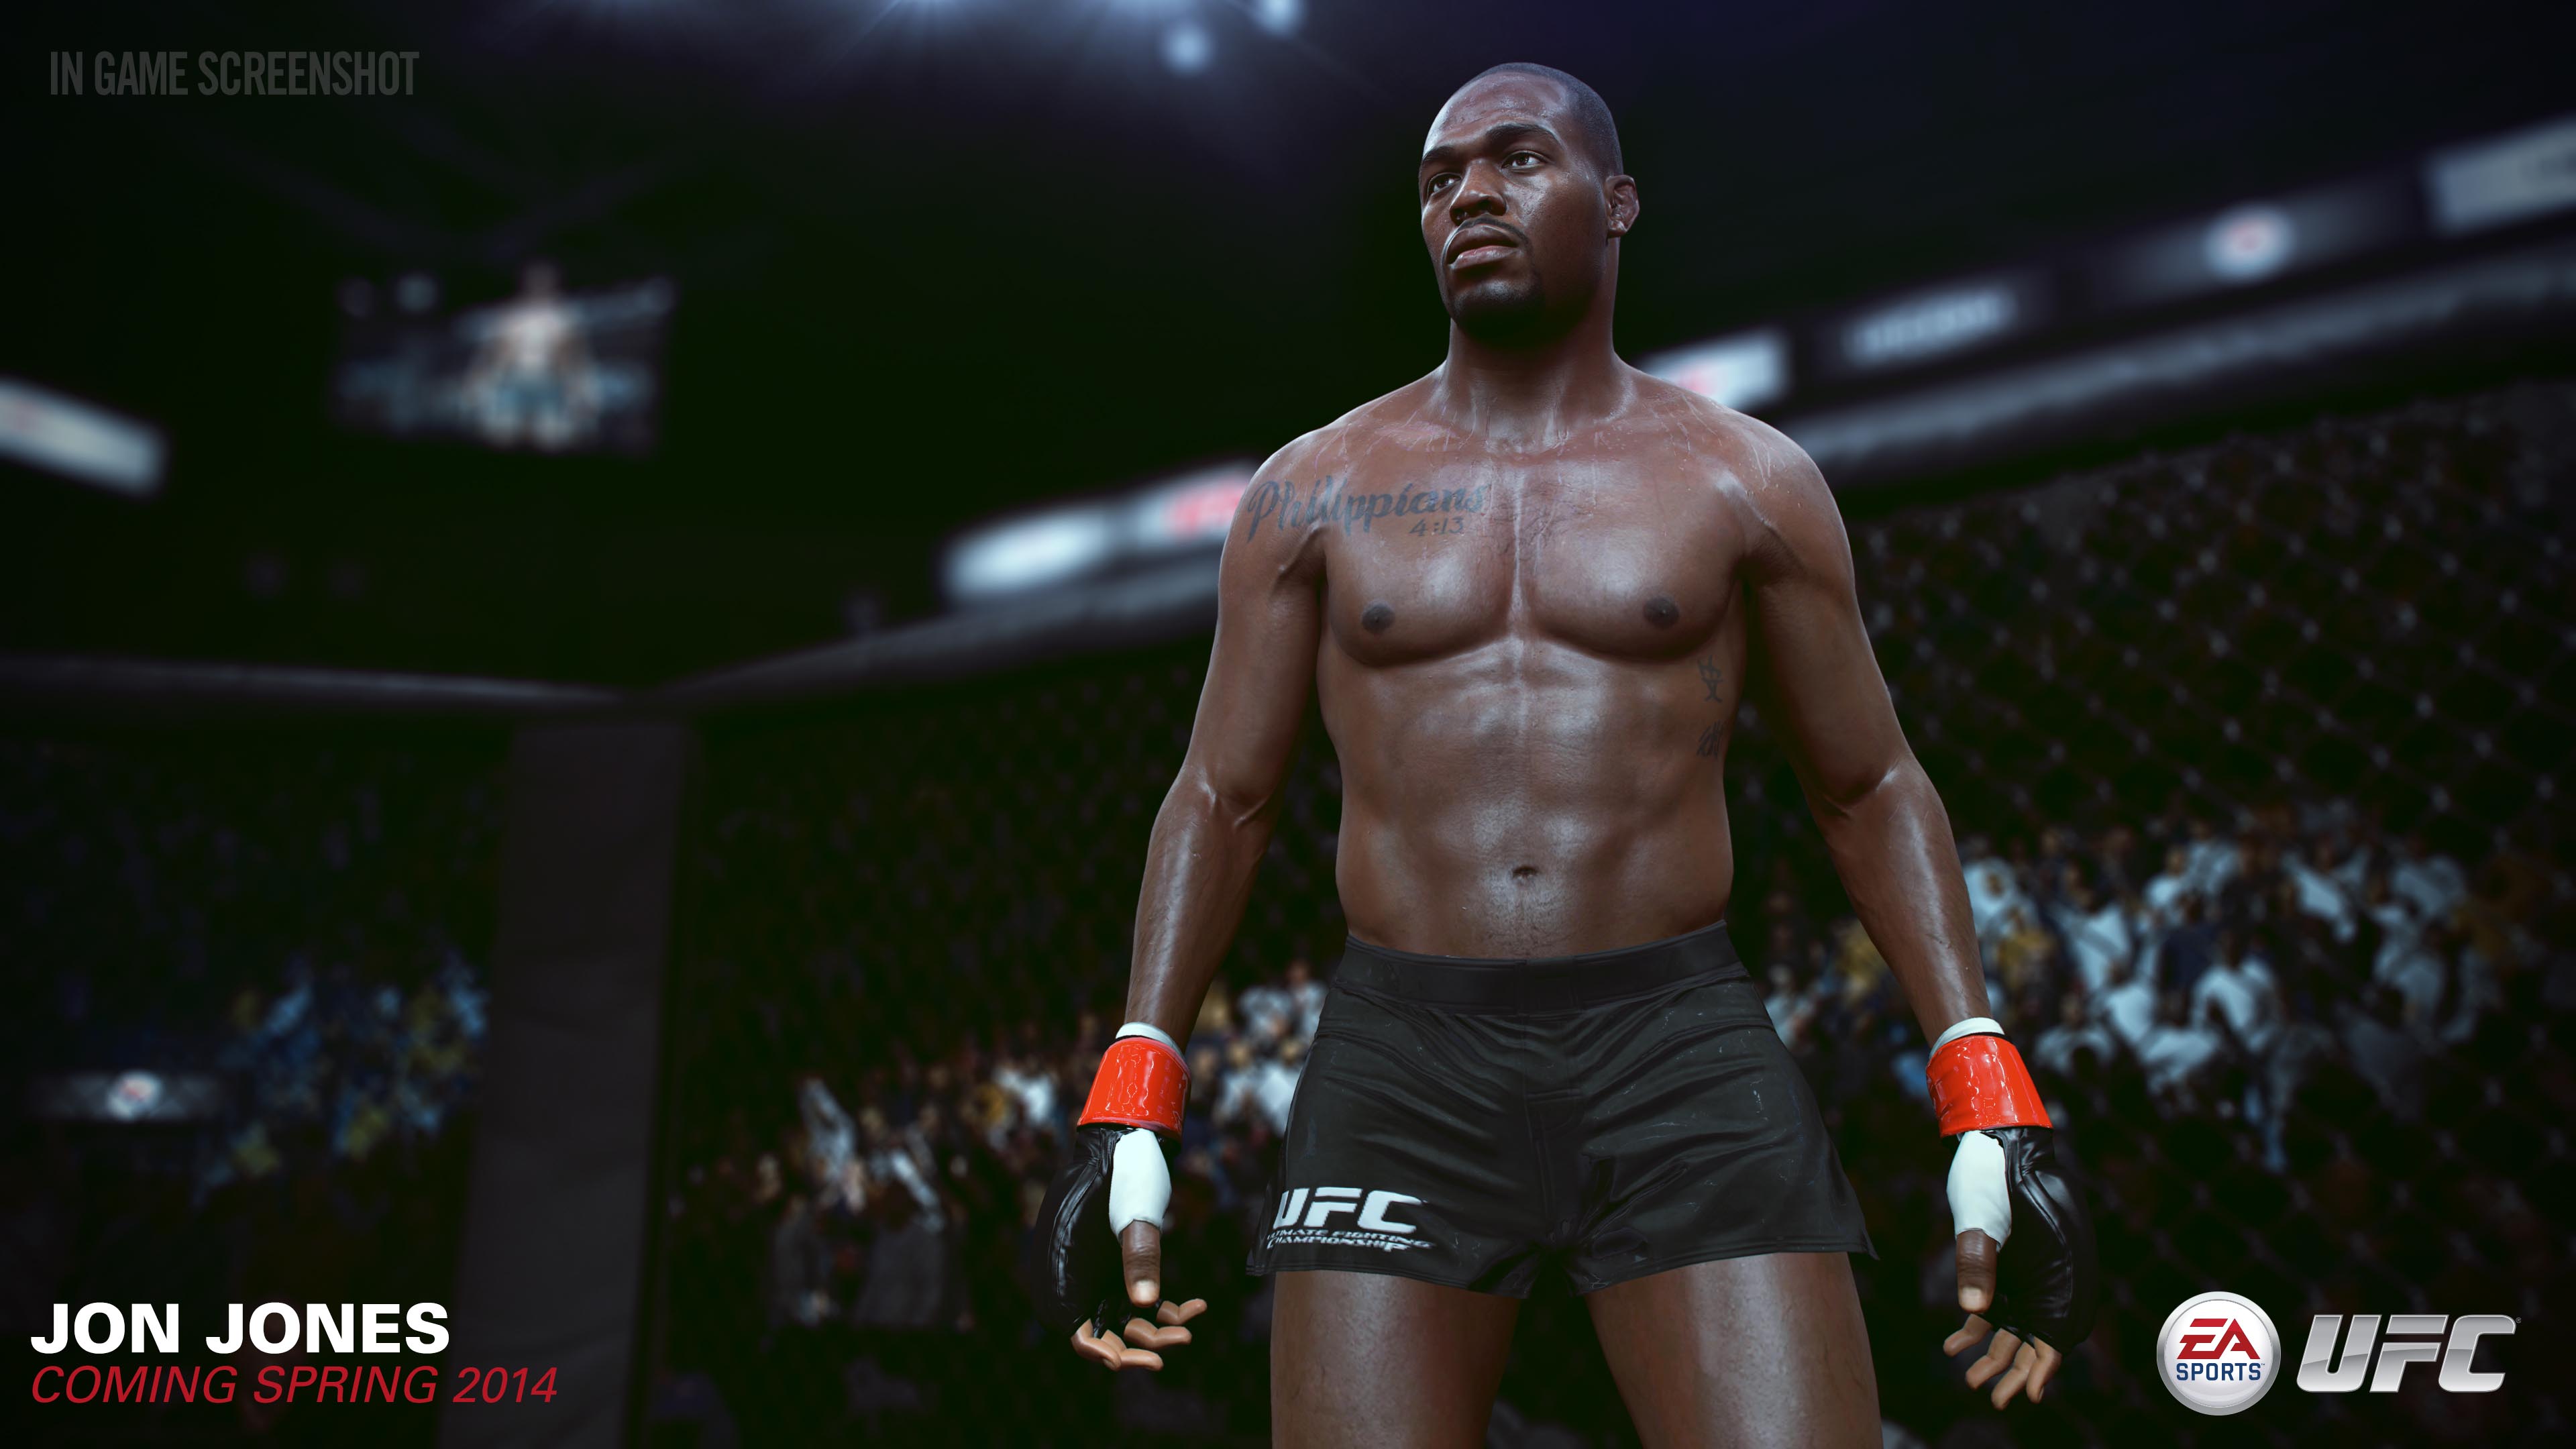 EA Sports UFC Roster Reveal Full List including Bruce Lee & Royce Gracie3840 x 2160